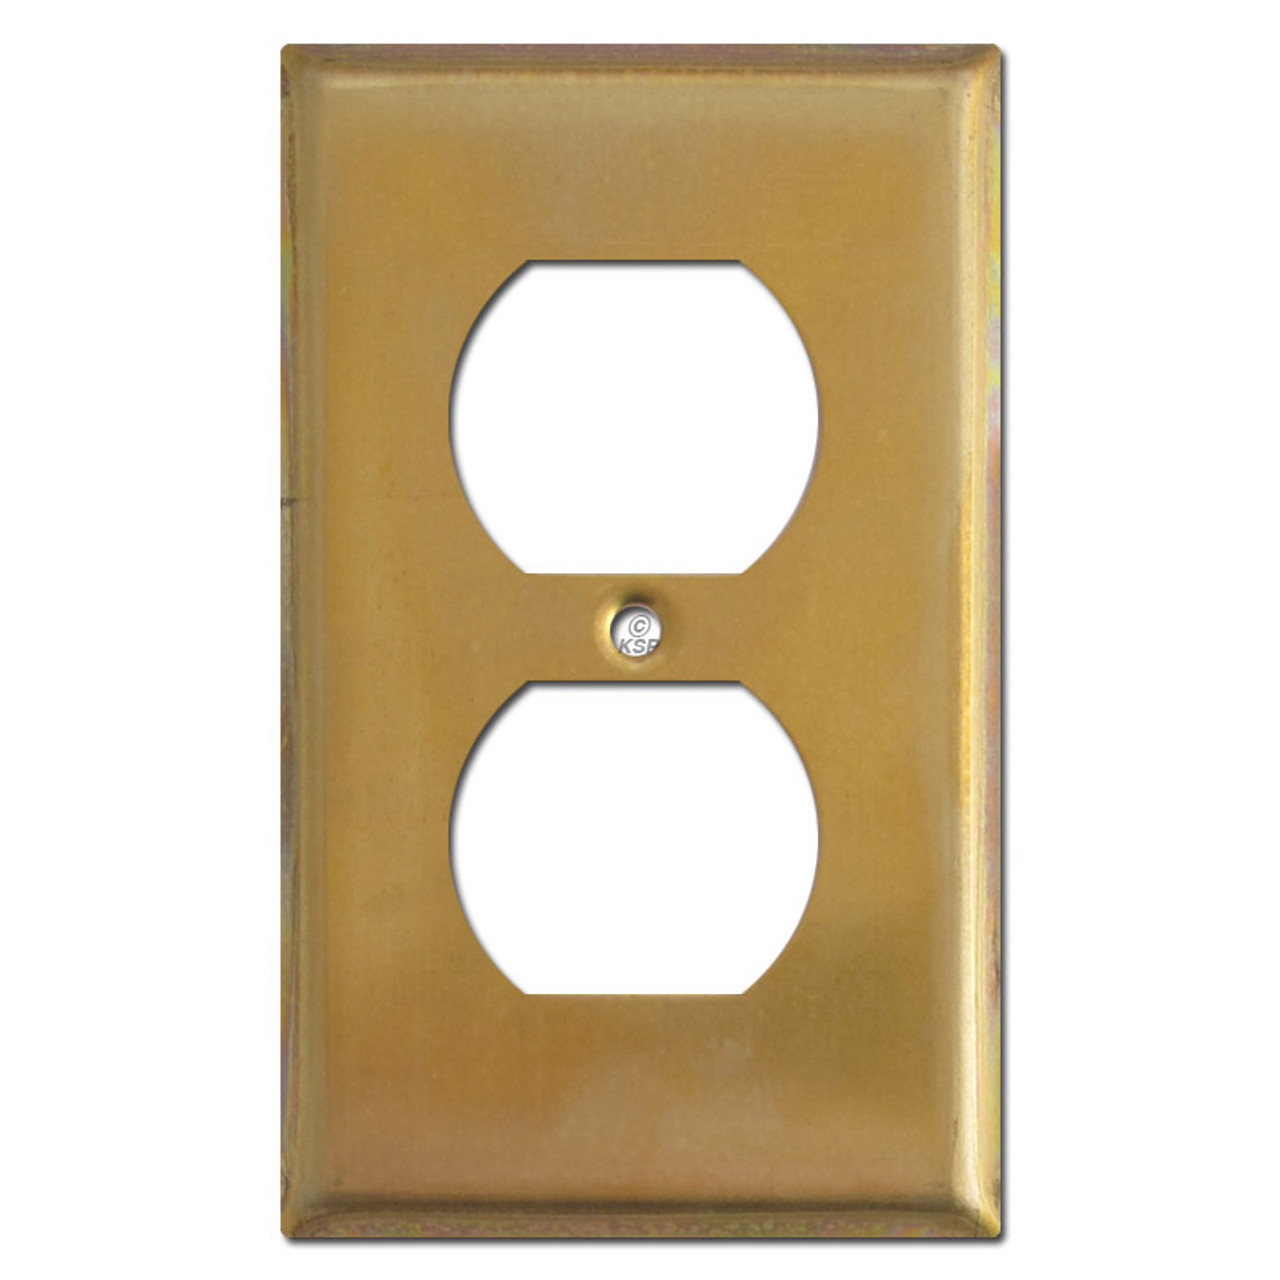 1 Push-Button Light Switch Plate Cover - Unfinished Raw Brass